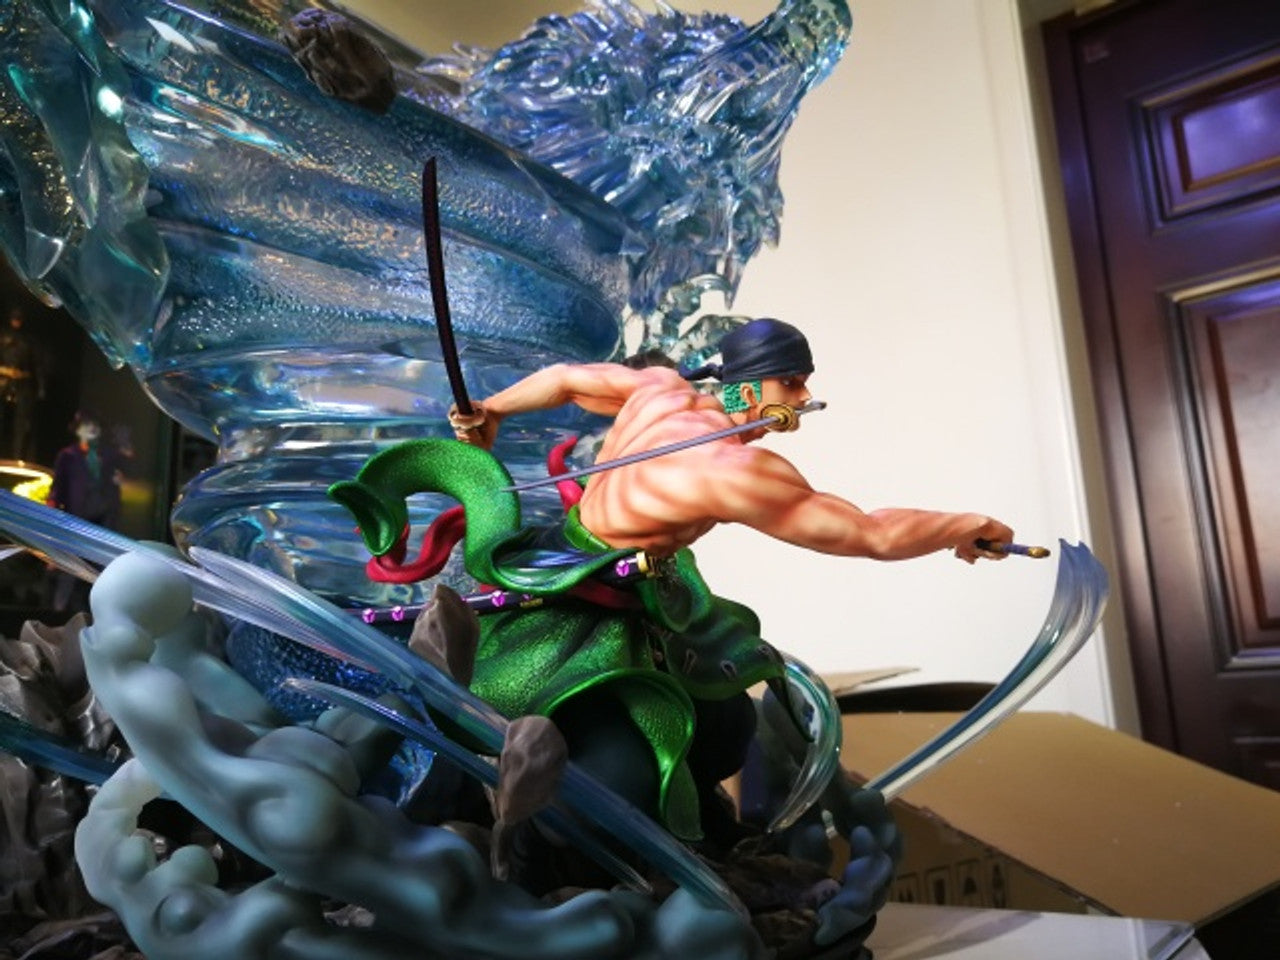 One Piece - Top Studio - Zoro 1/6 (Price Does Not Include Shipping - Please Read Description)